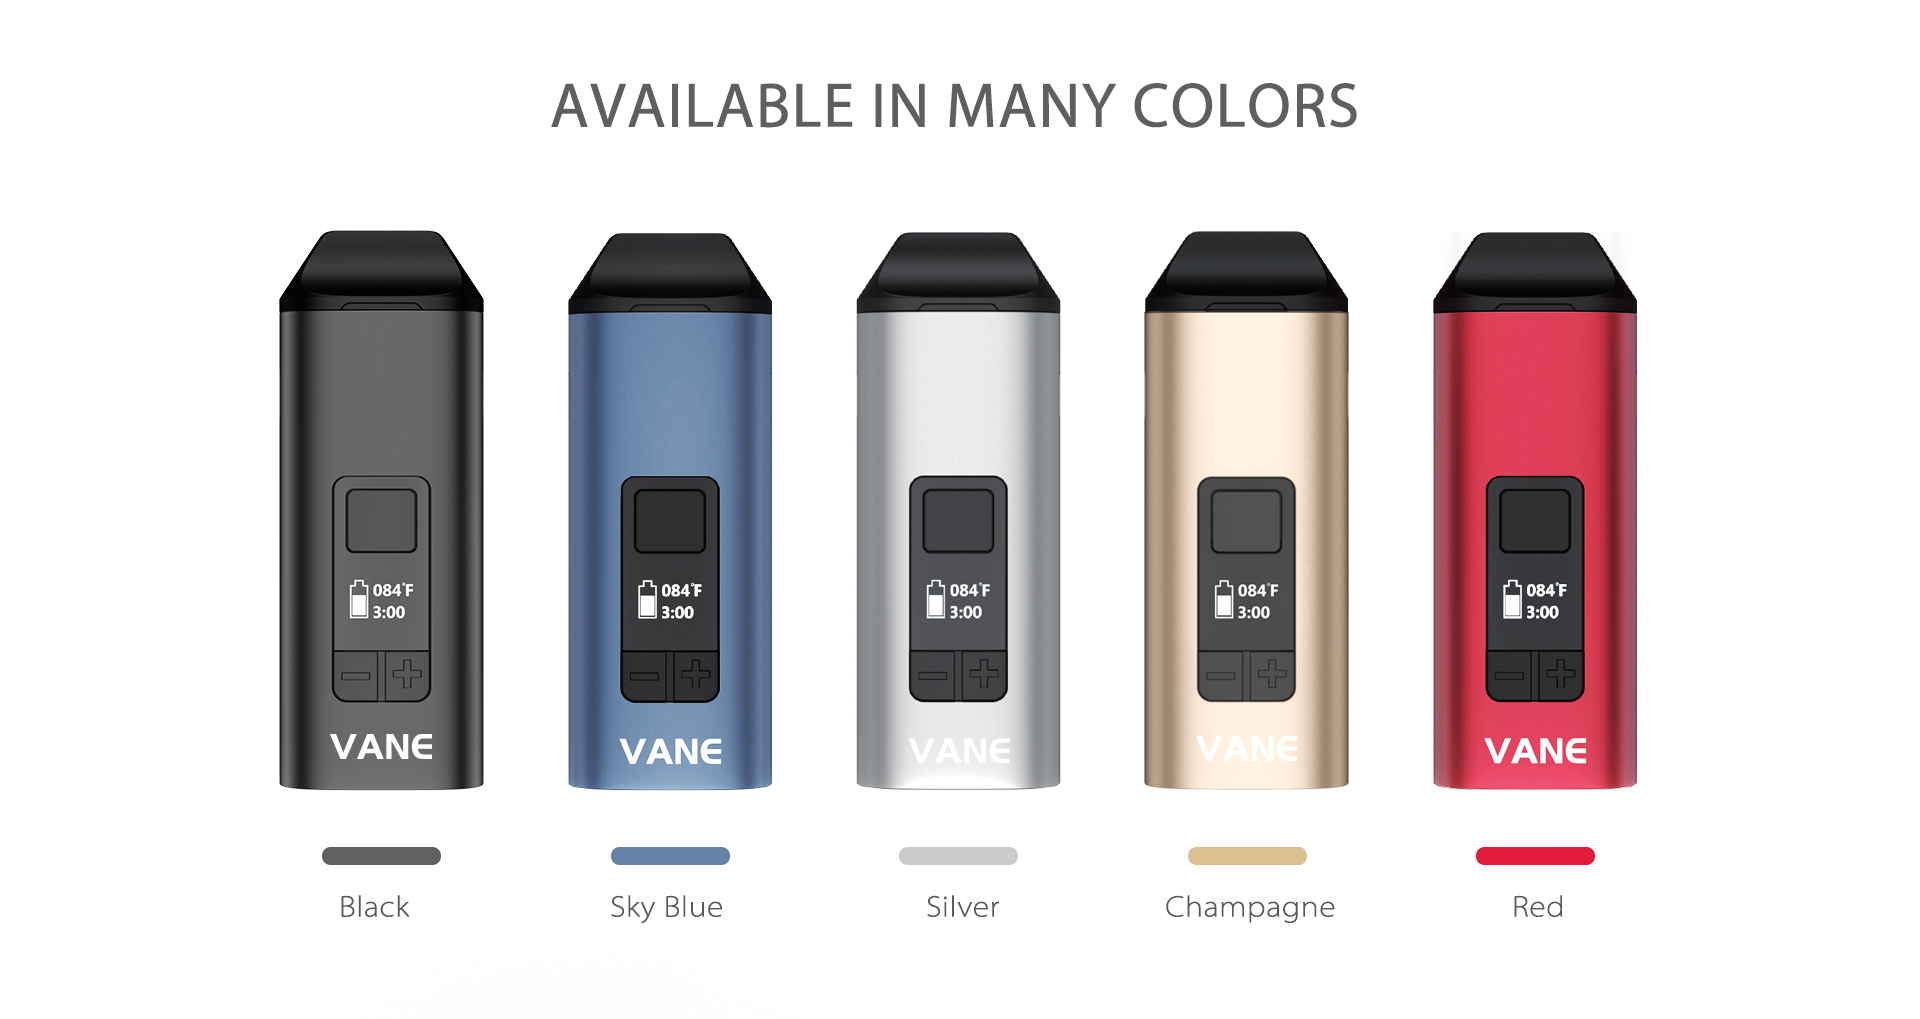 Yocan Vane Dry Vaporizer comes with 5 colors.